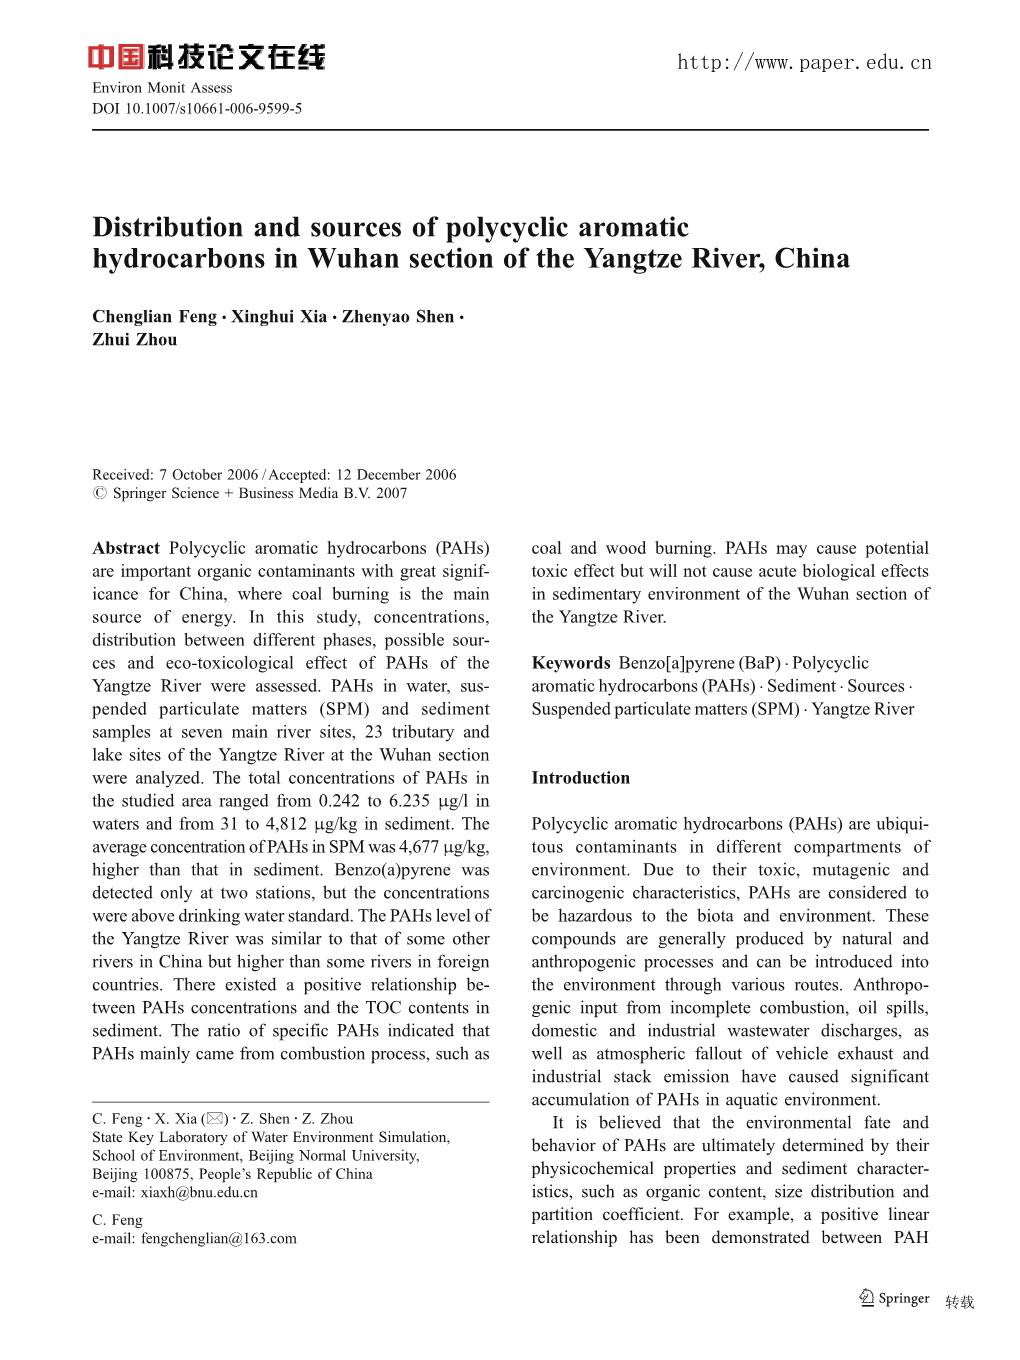 Distribution and Sources of Polycyclic Aromatic Hydrocarbons in Wuhan Section of the Yangtze River, China